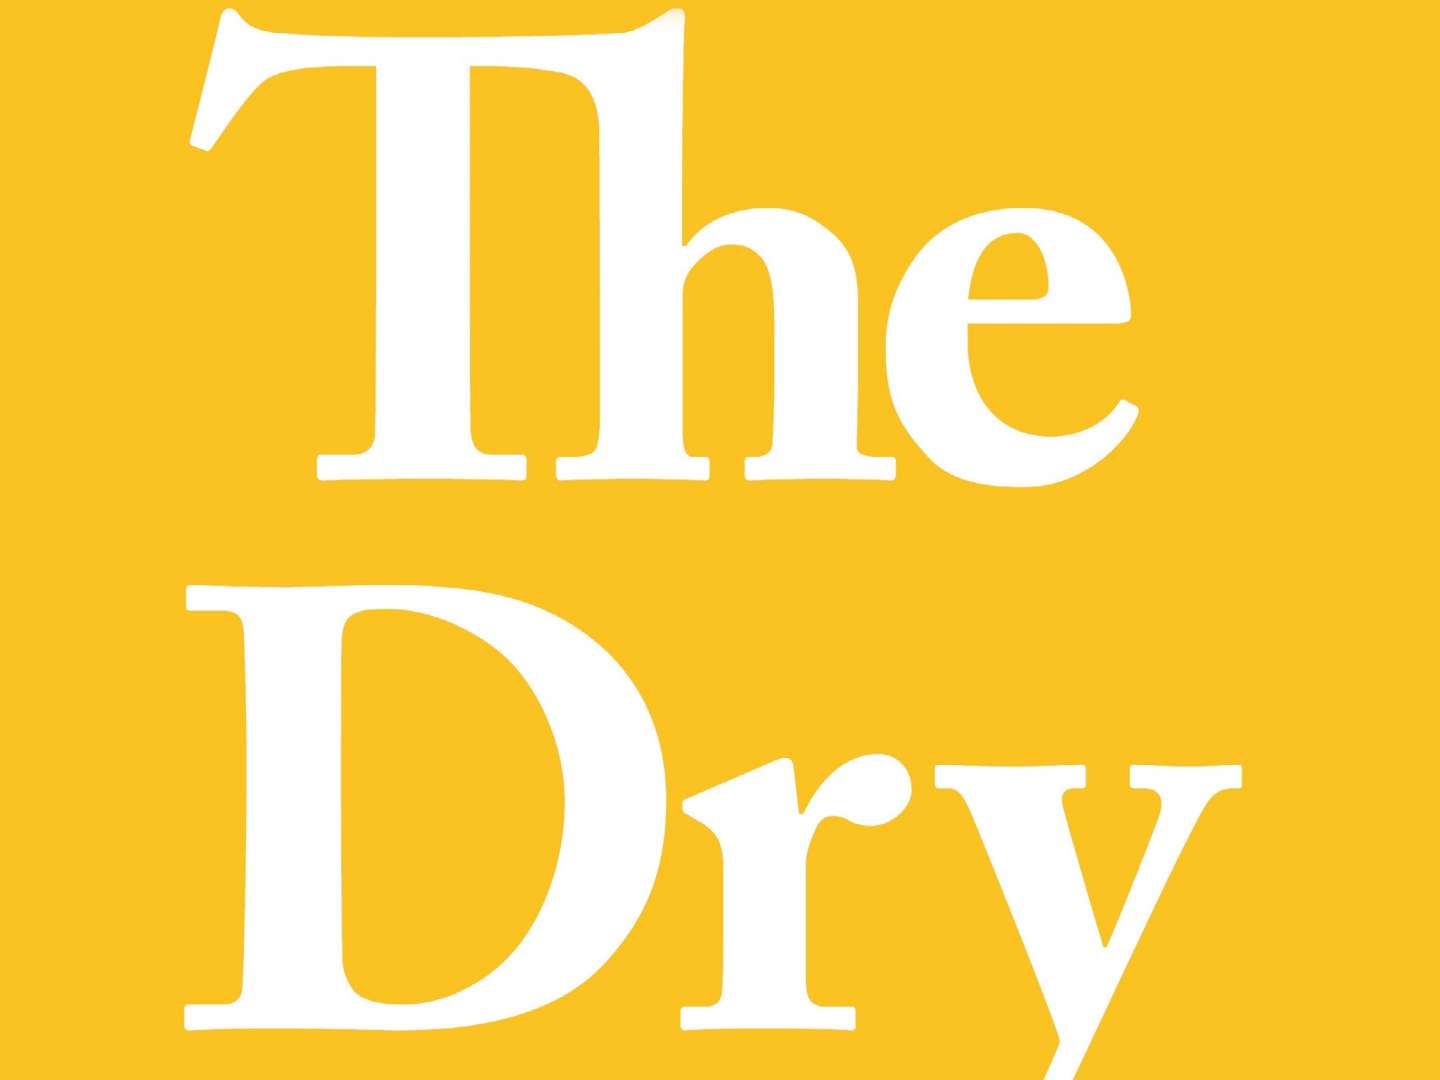 The Wet & The Dry